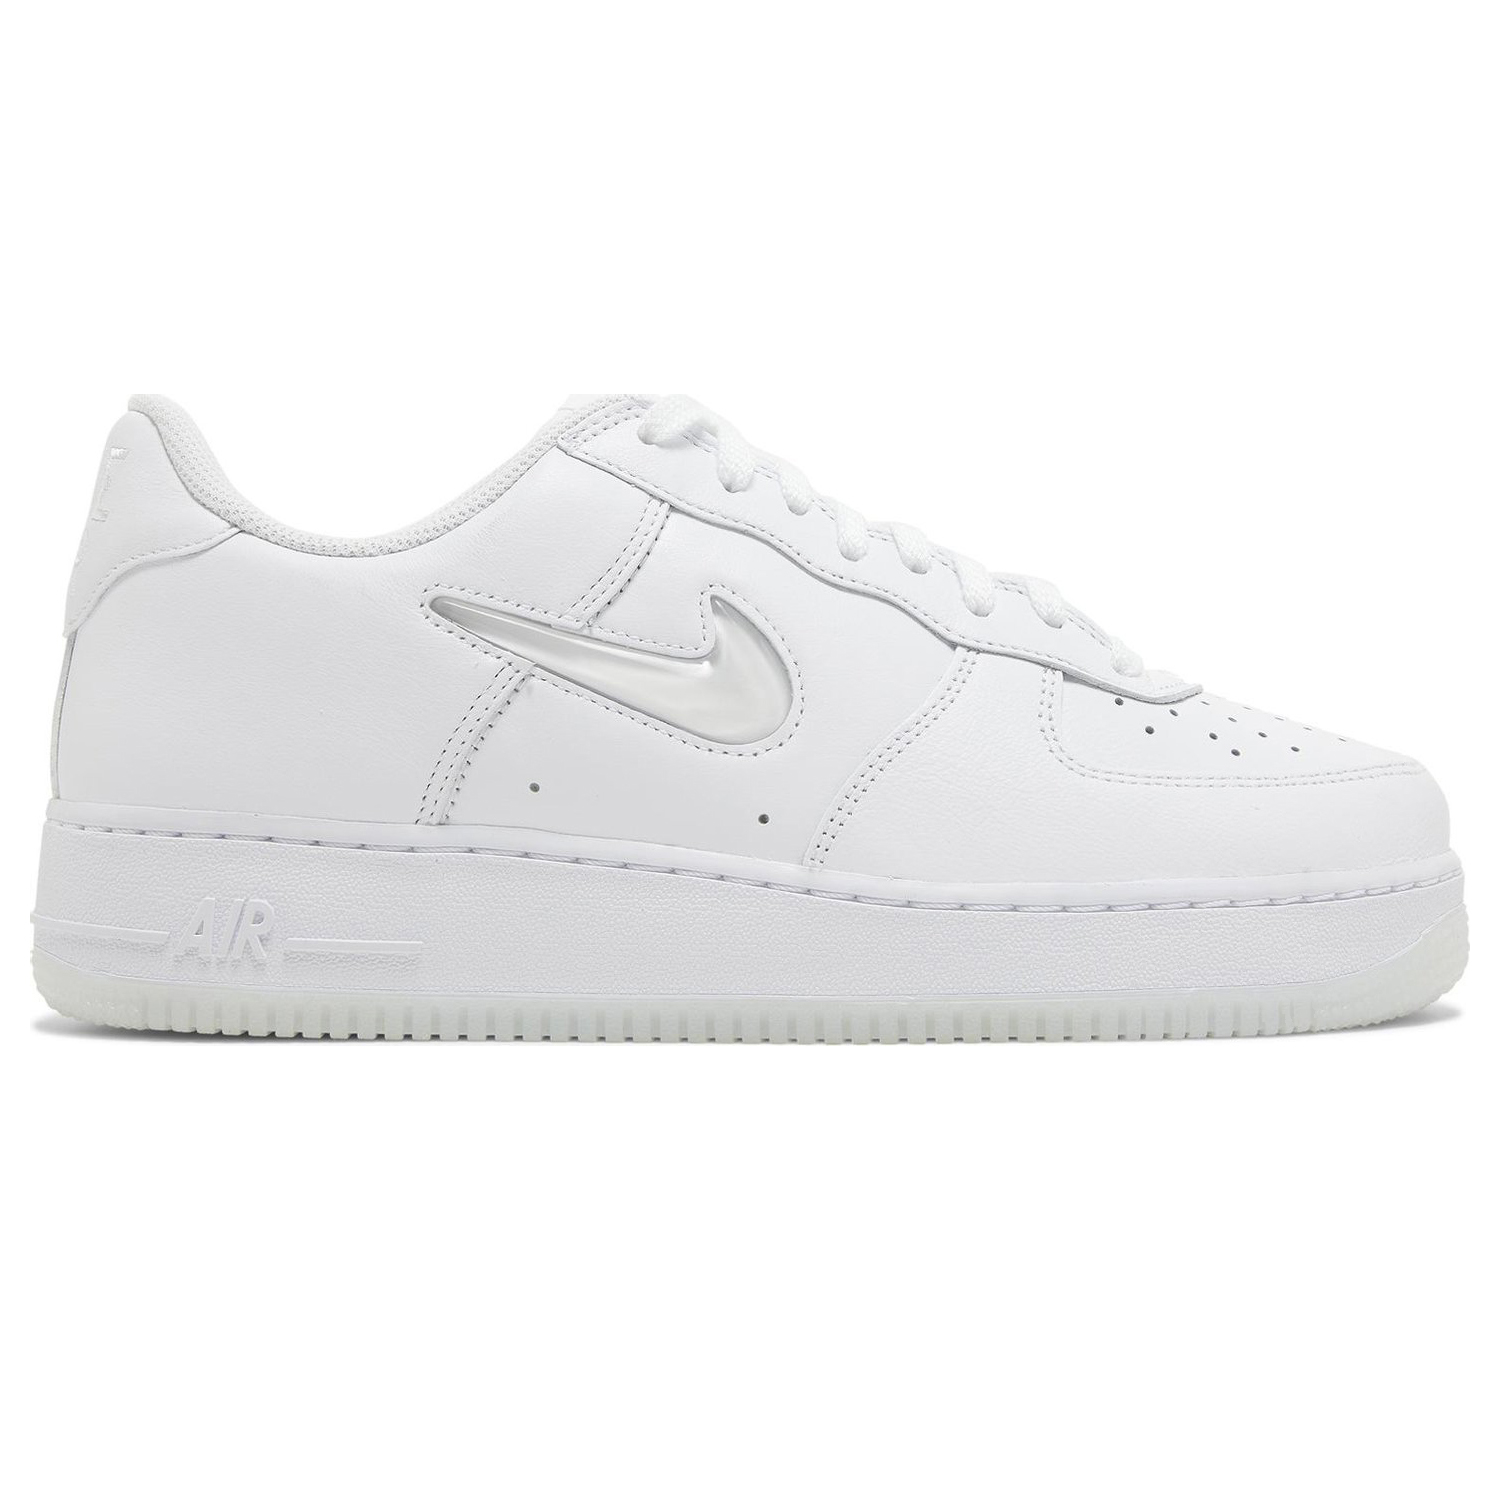 Кроссовки Nike Air Force 1 Jewel 'Color of the Month - Triple White', белый кроссовки nike sportswear air force 1 white gold